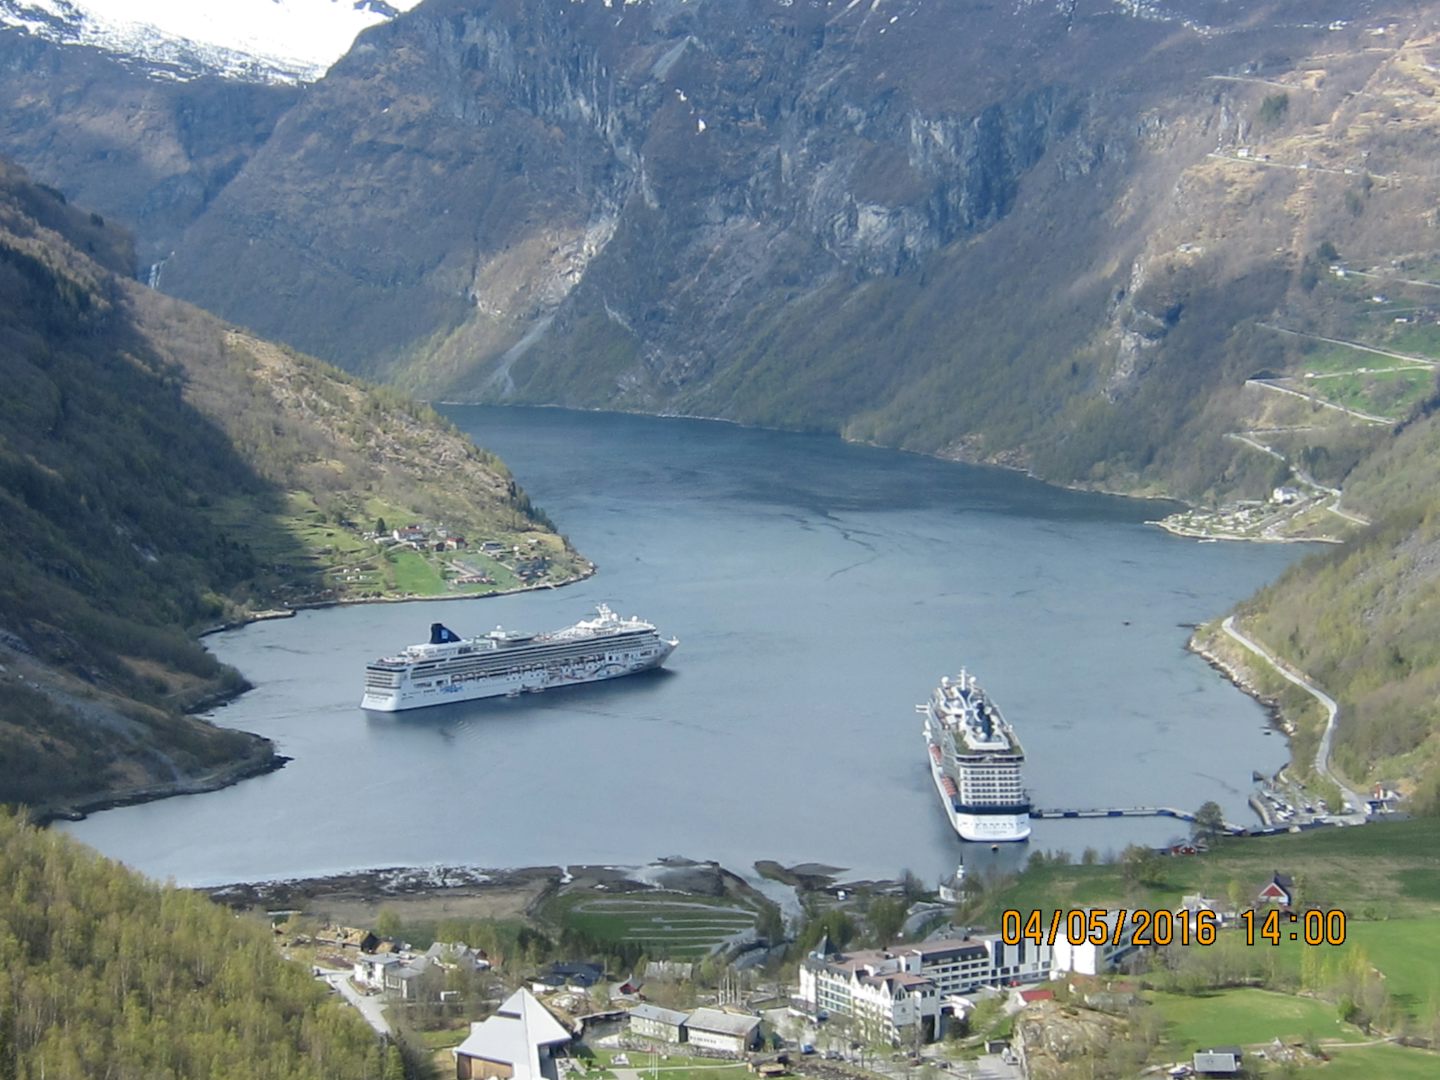 Geiranger from one of the viewpoints.